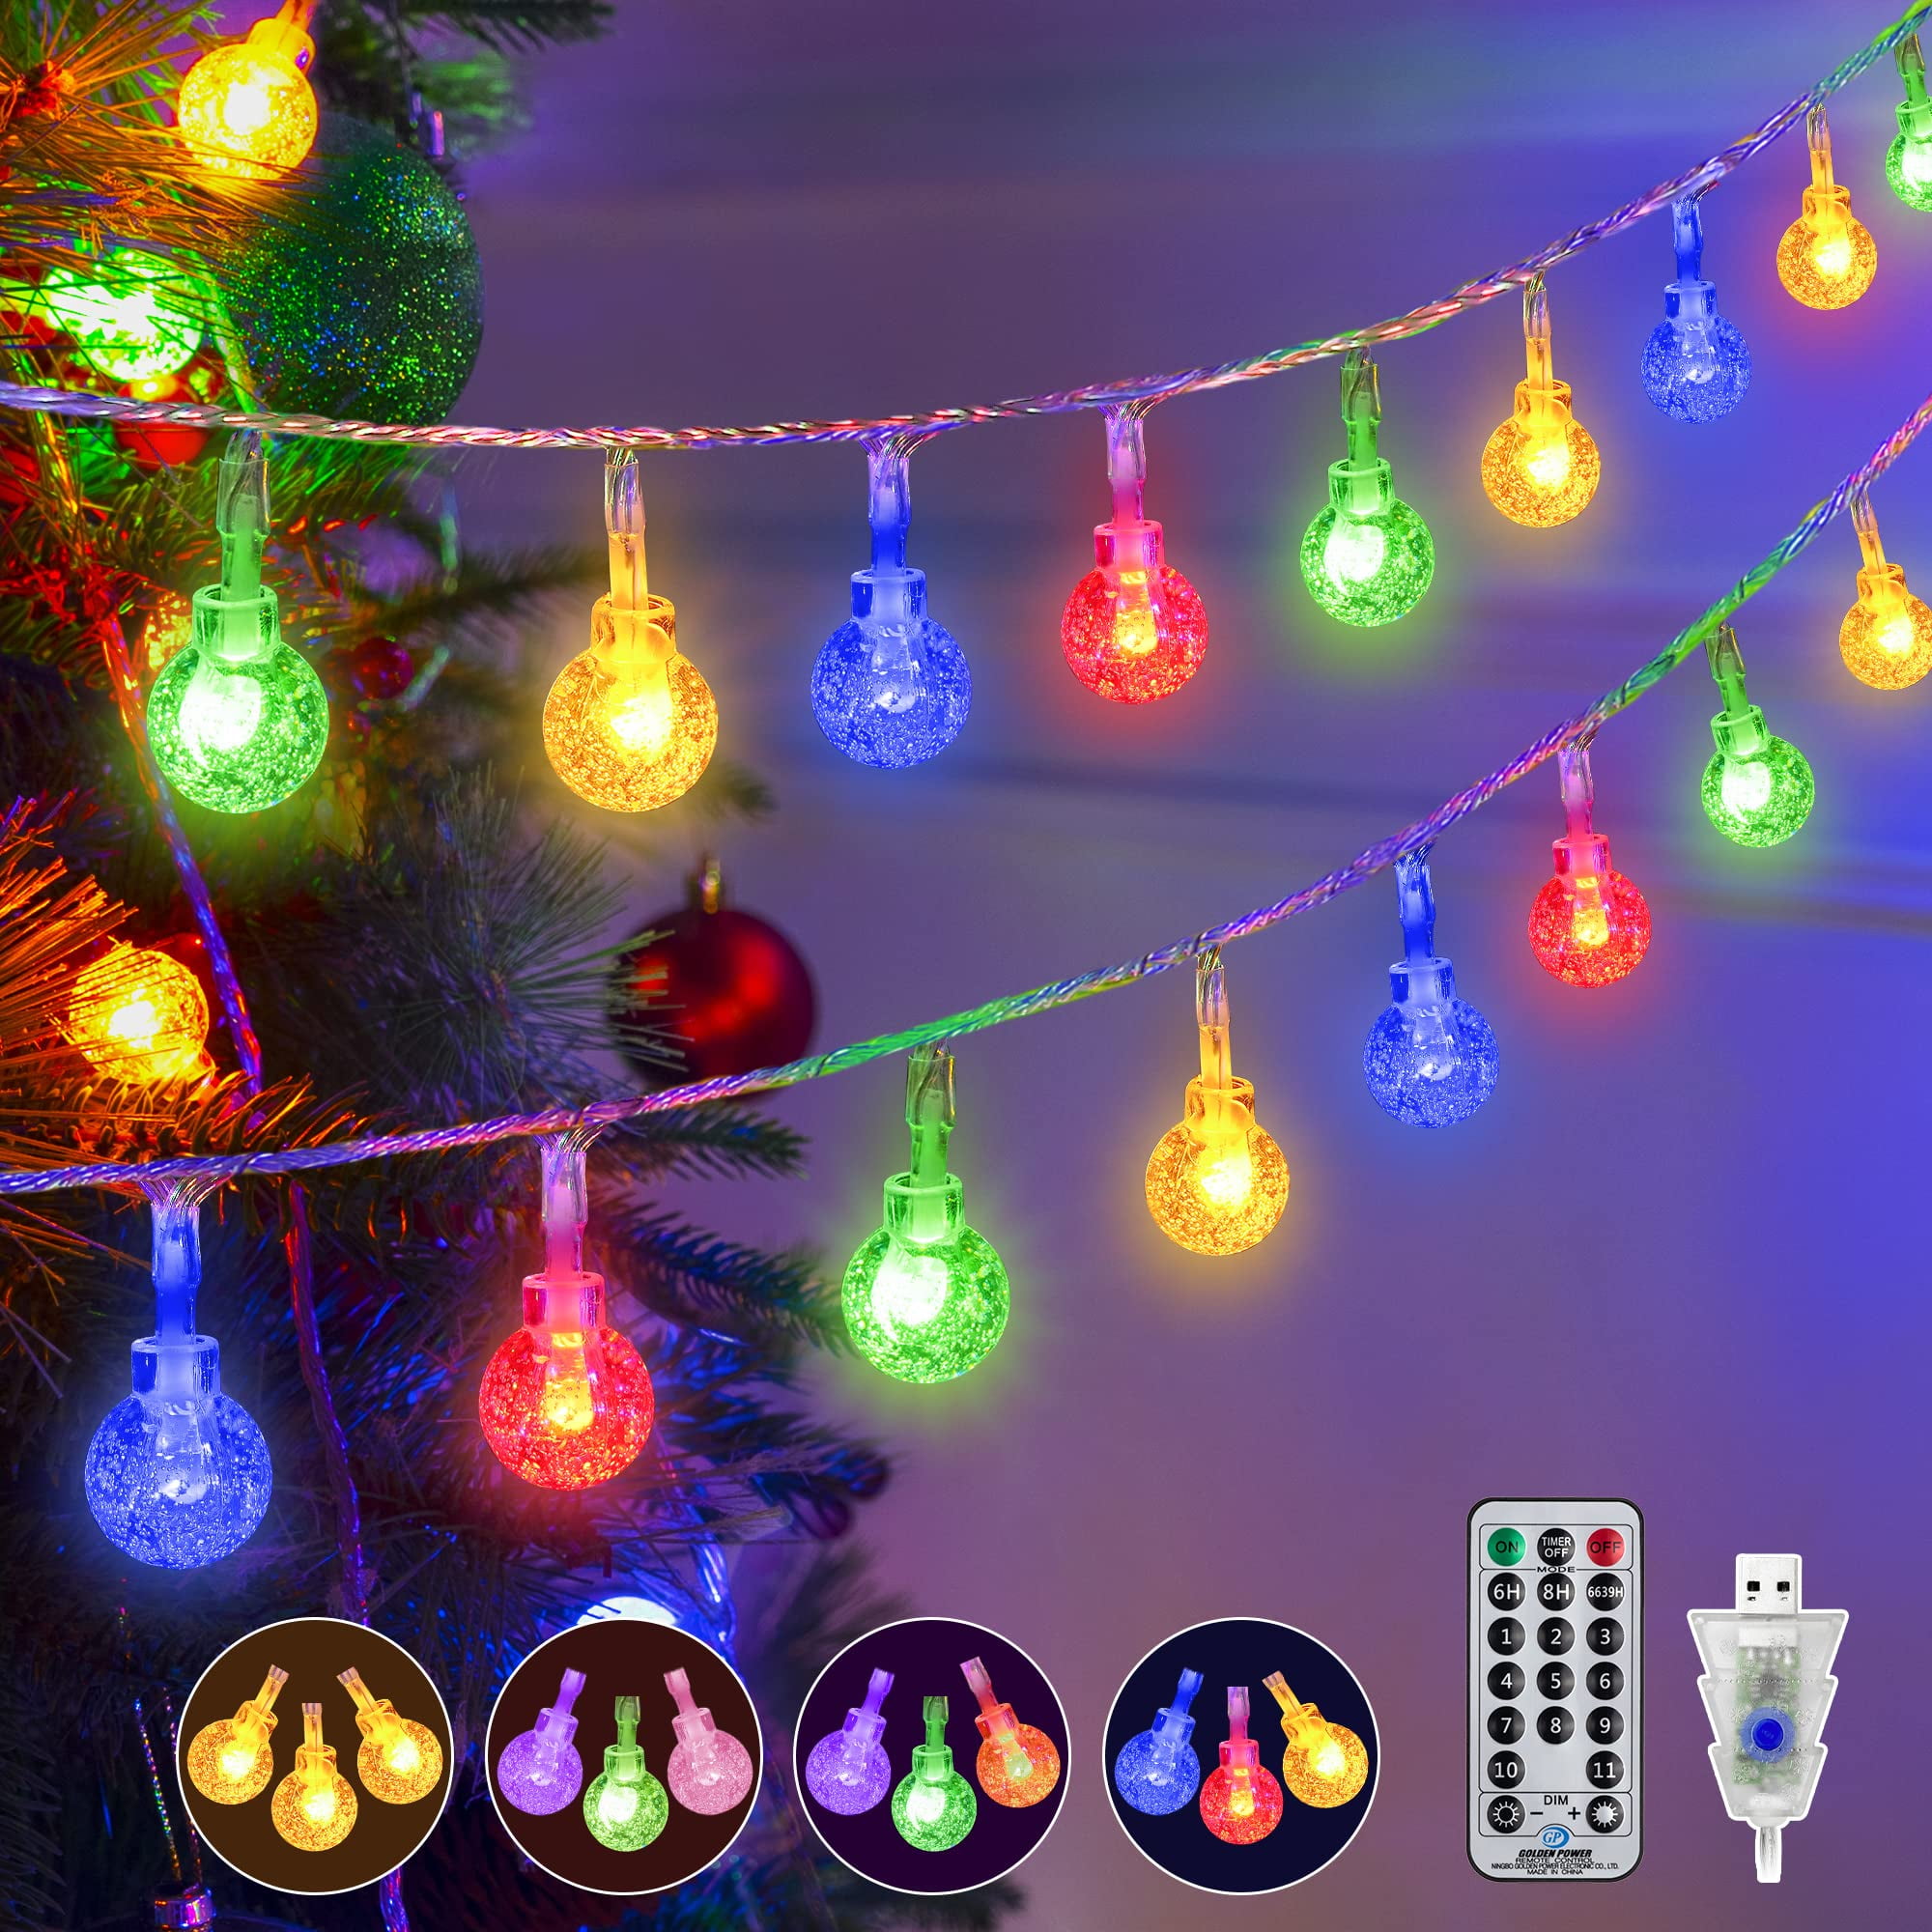 Portal overdrive Mediator Christmas Lights Outdoor Waterproof, 11 Modes 49FT 100LED Globe String  Lights - USB Color Changing, Timer, Indoor Lights with Remote for Xmas Tree  Bedroom Camping Classroom Patio Decorations - Walmart.com